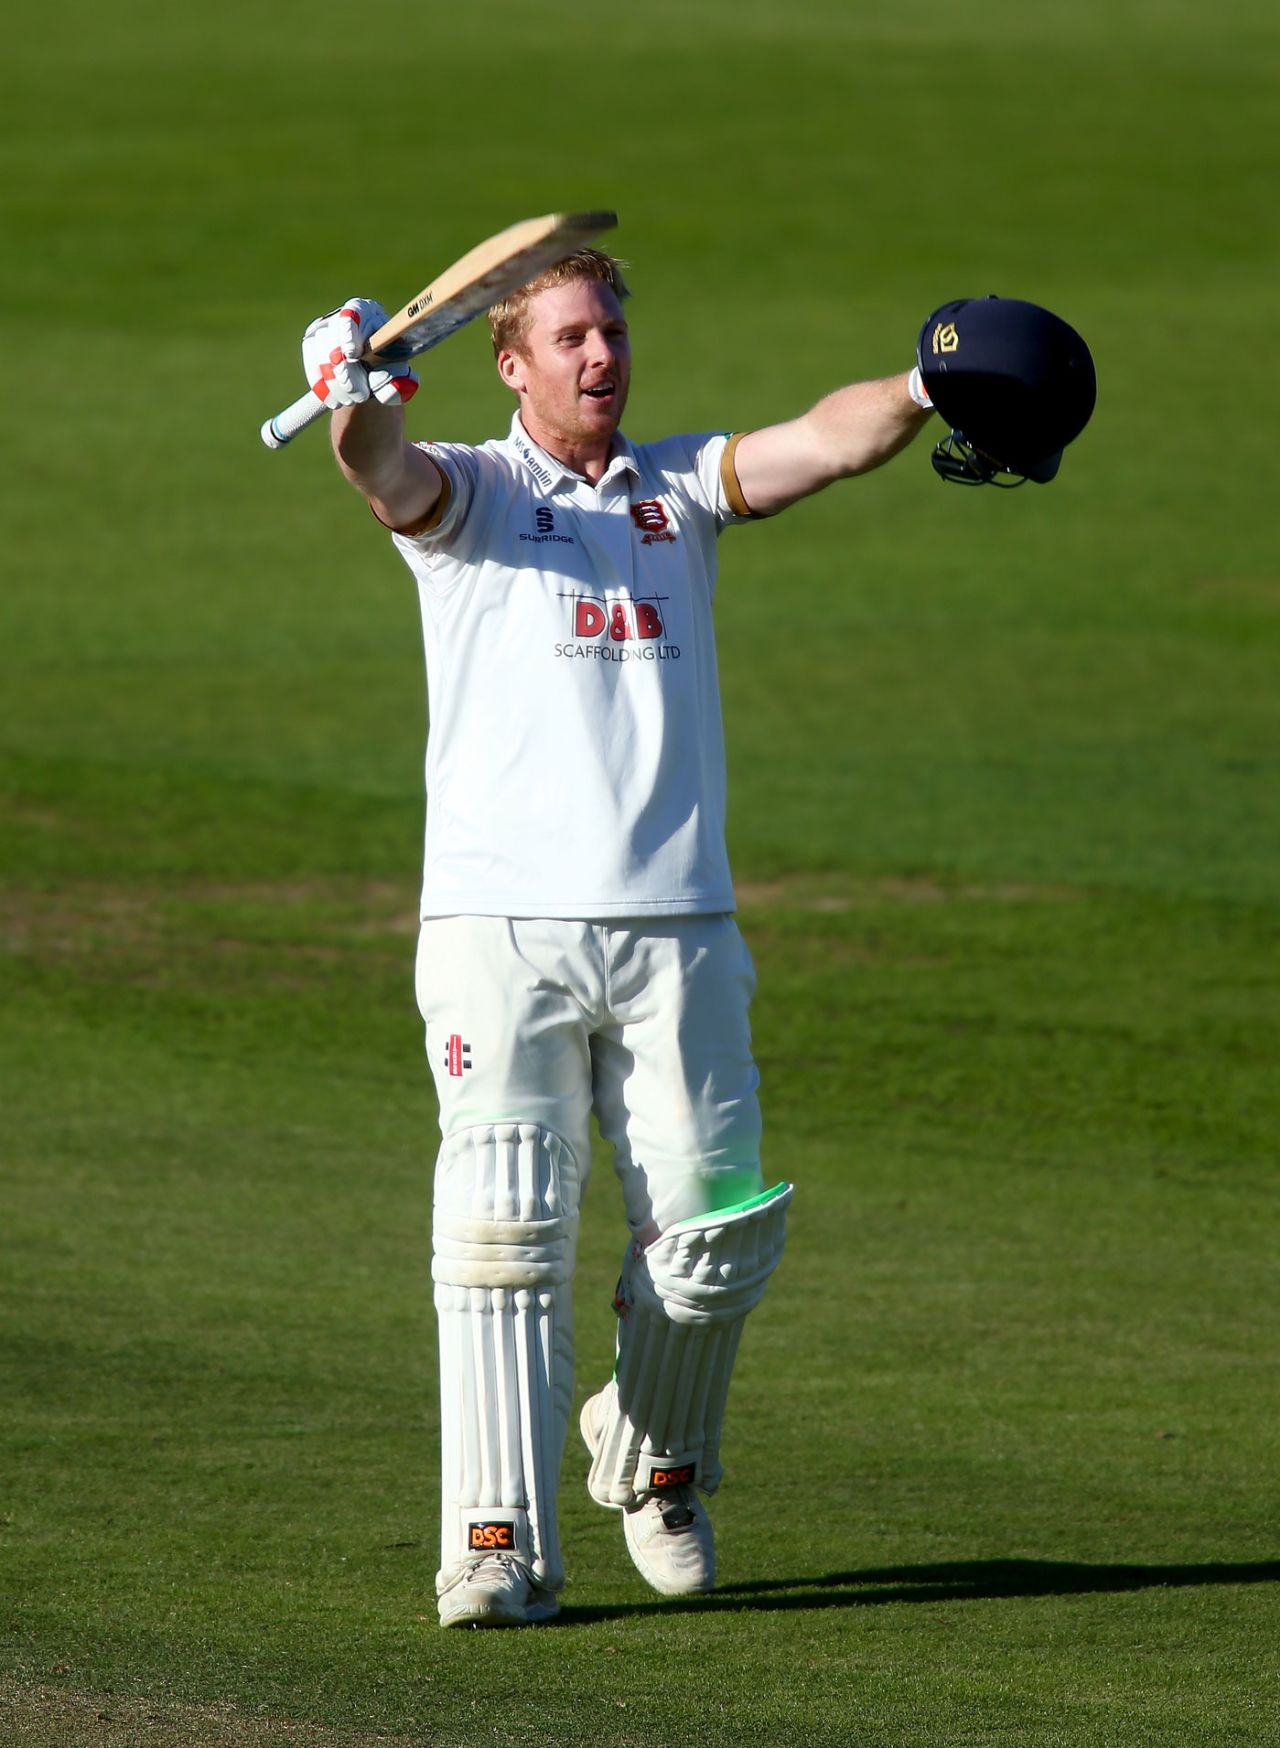 Simon Harmer scored his maiden hundred for Essex, Surrey v Essex, County Championship, Division One, The Oval, September 25, 2018